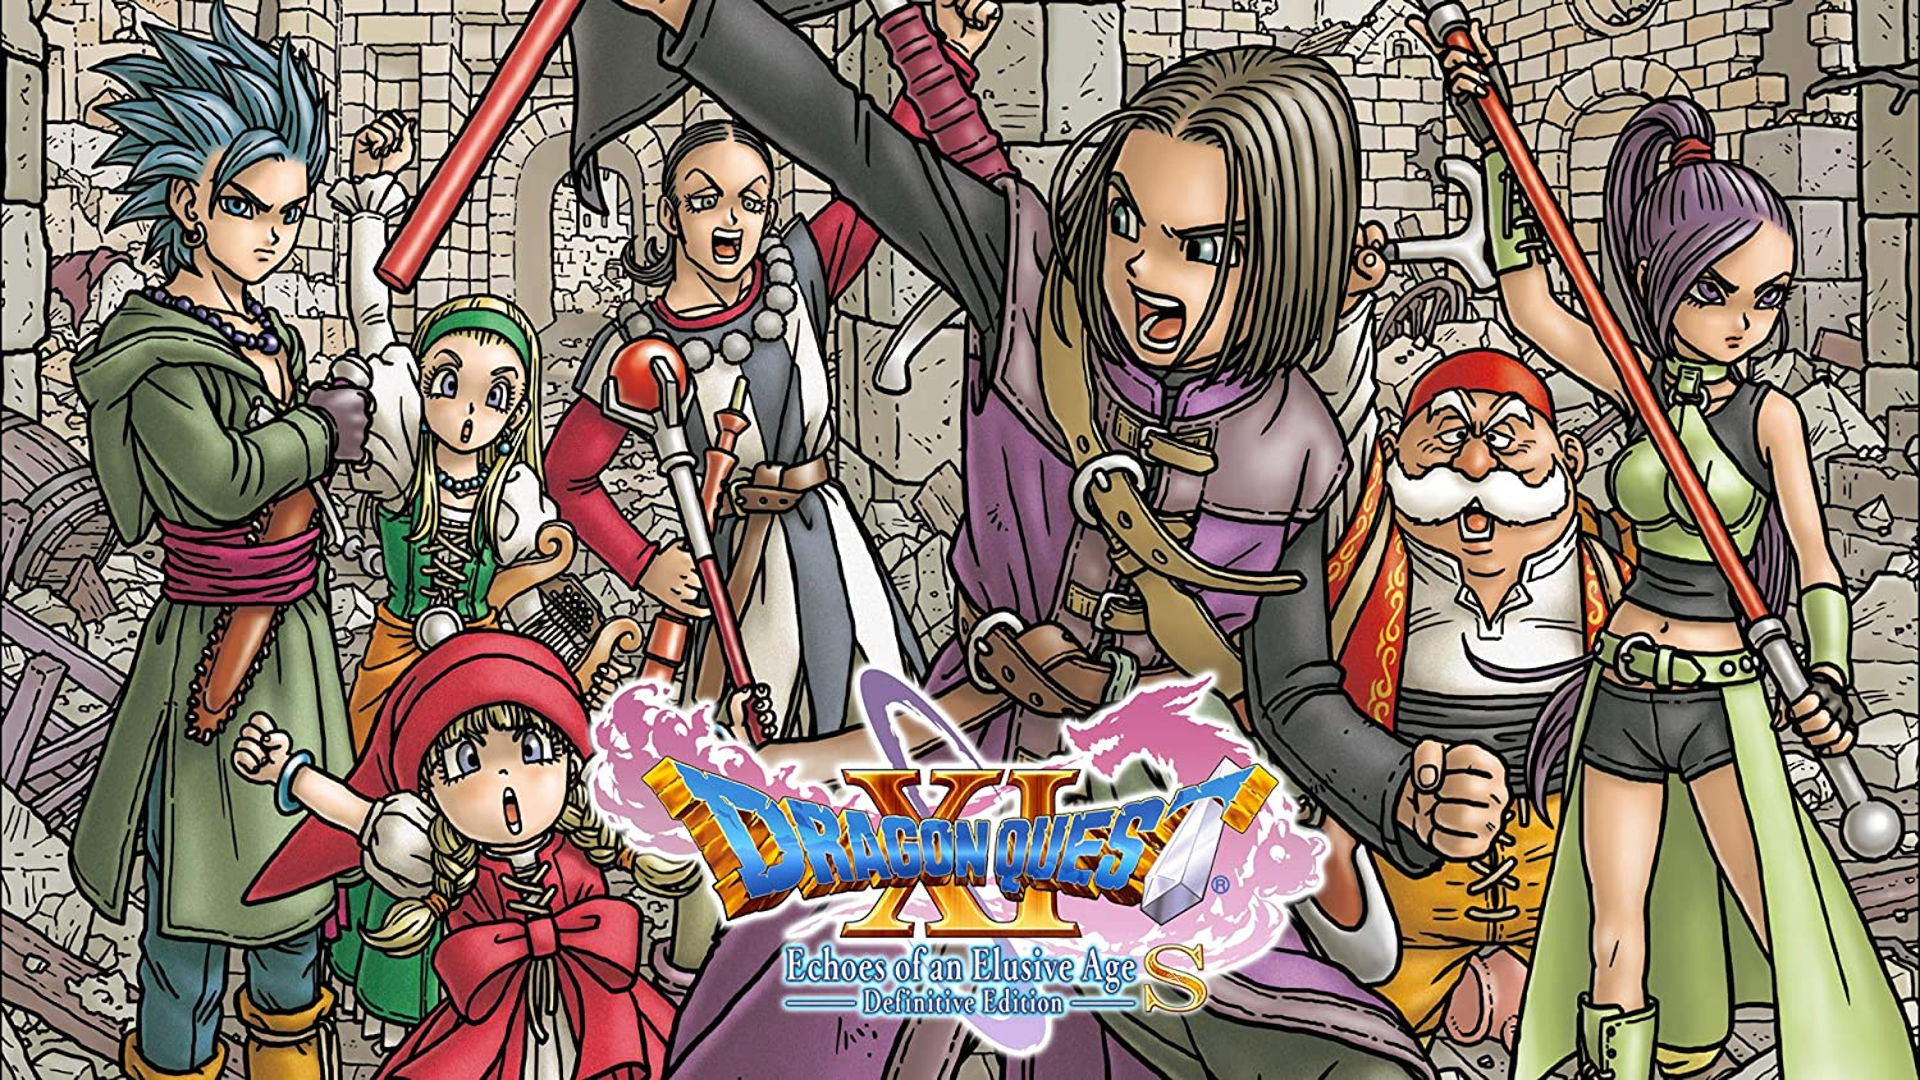 Dragon Quest XI S deal poster, showing a group of characters from the game